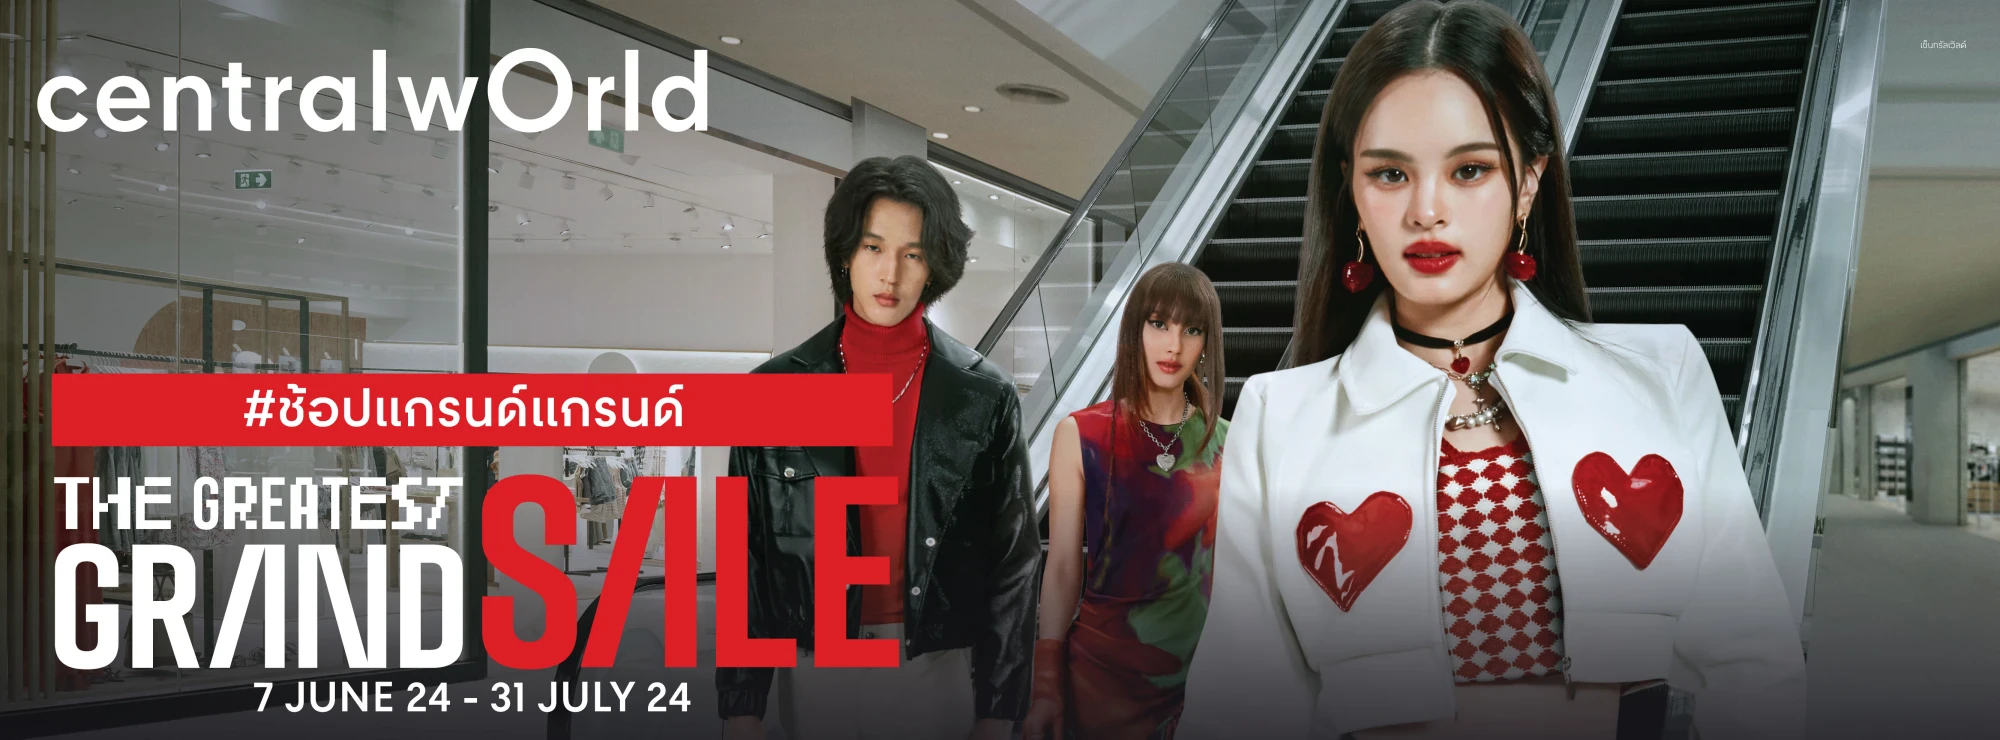 The Greatest Grand Sale centralwOrld ontop promotion